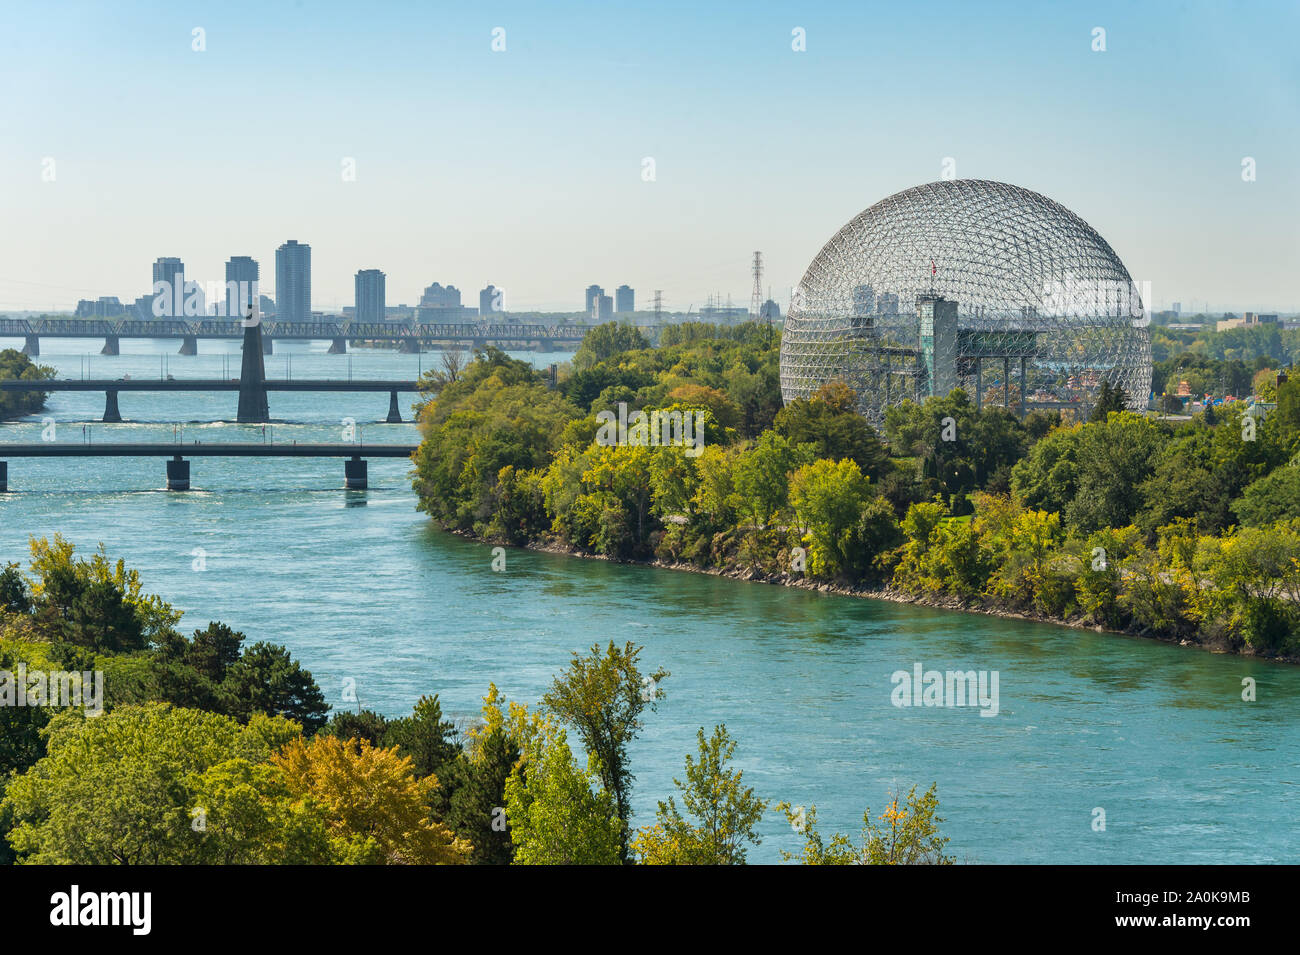 Montreal, CANADA - 19 September 2019: Biosphere & Saint-Lawrence River from Jacques-Cartier Bridge. Stock Photo